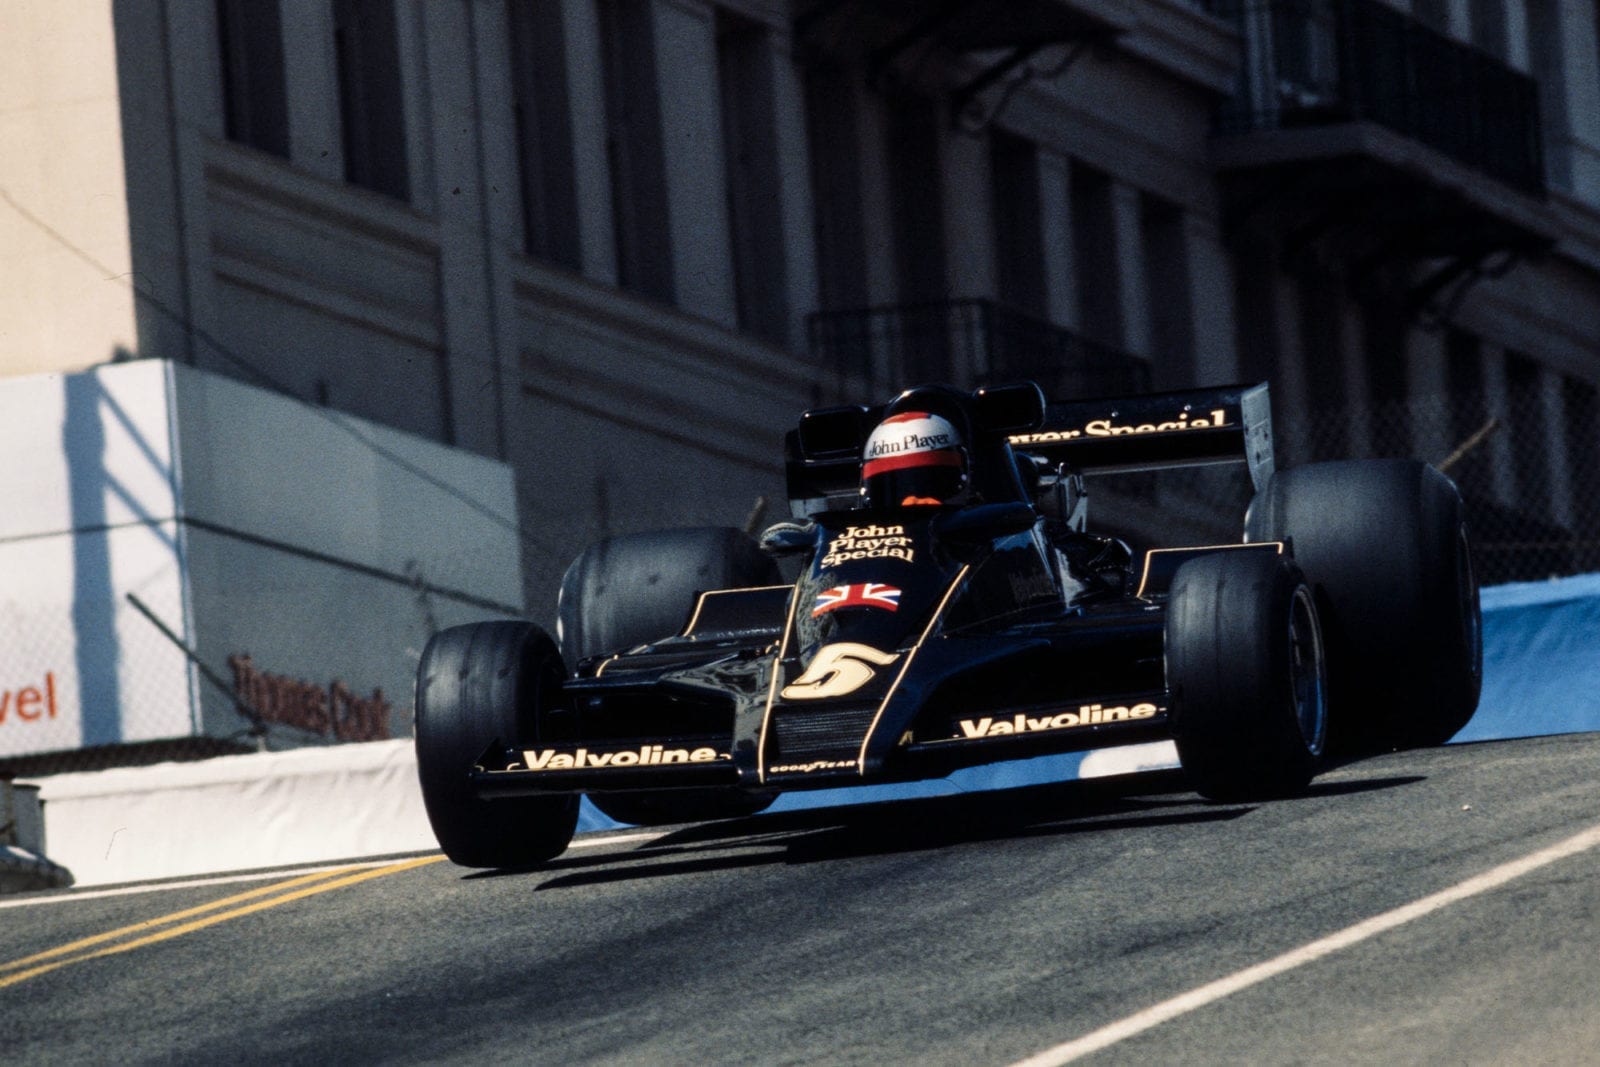 Mario Andretti (Lotus) at the 1977 United States Grand Prix West, Long Beach.